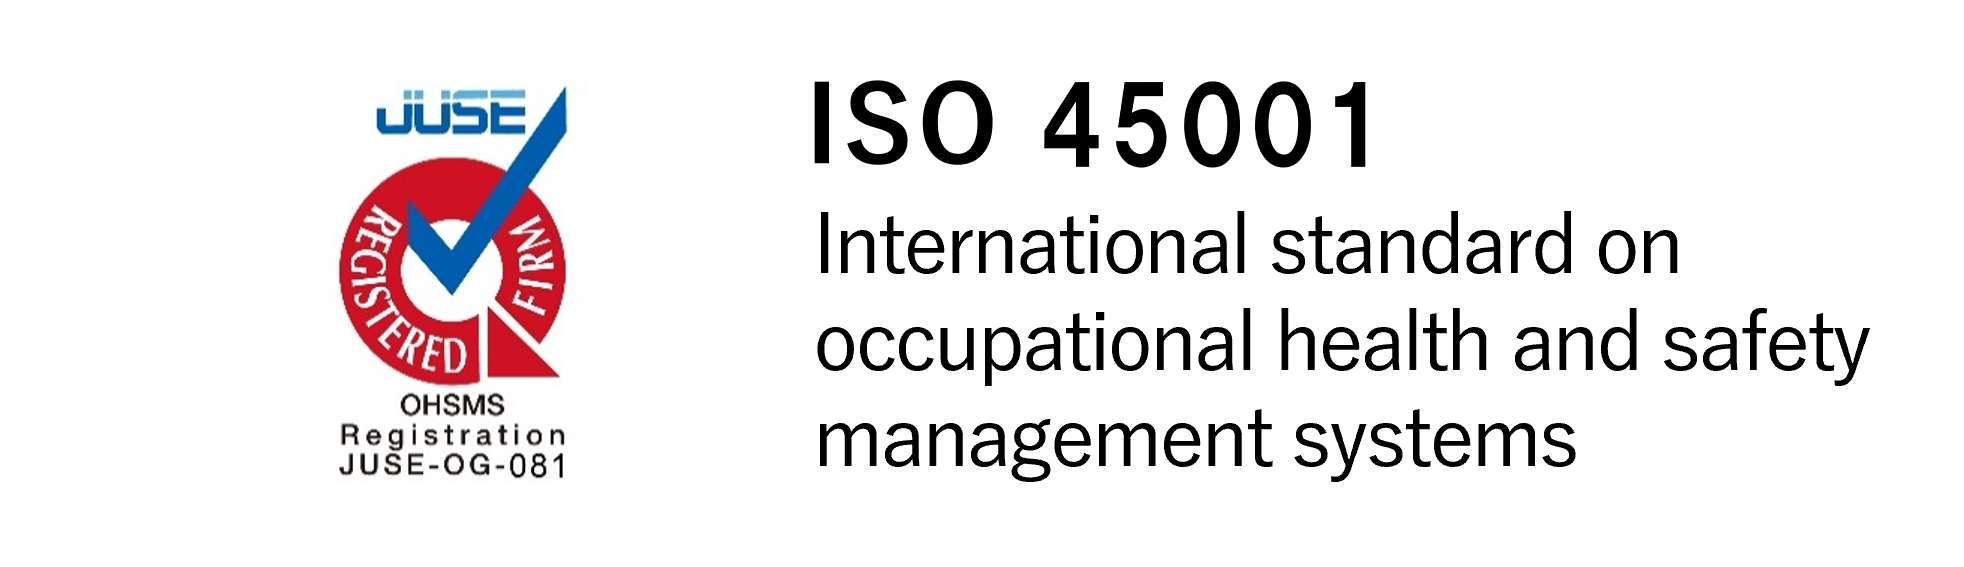 ISO 14001 International standard on occupational health and safety management systems